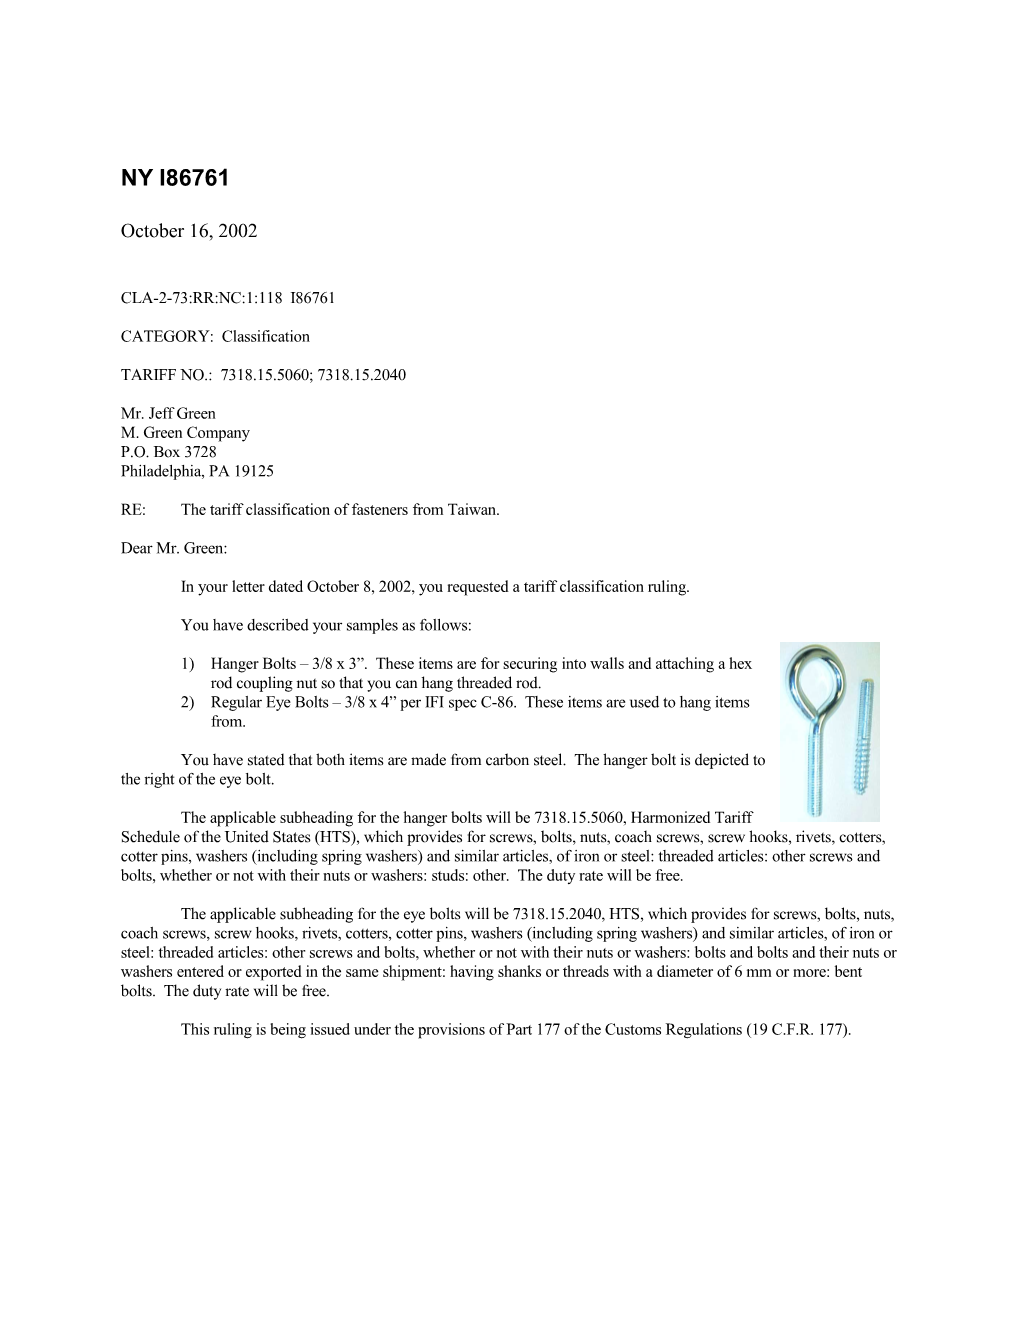 RE: the Tariff Classification of Fasteners from Taiwan